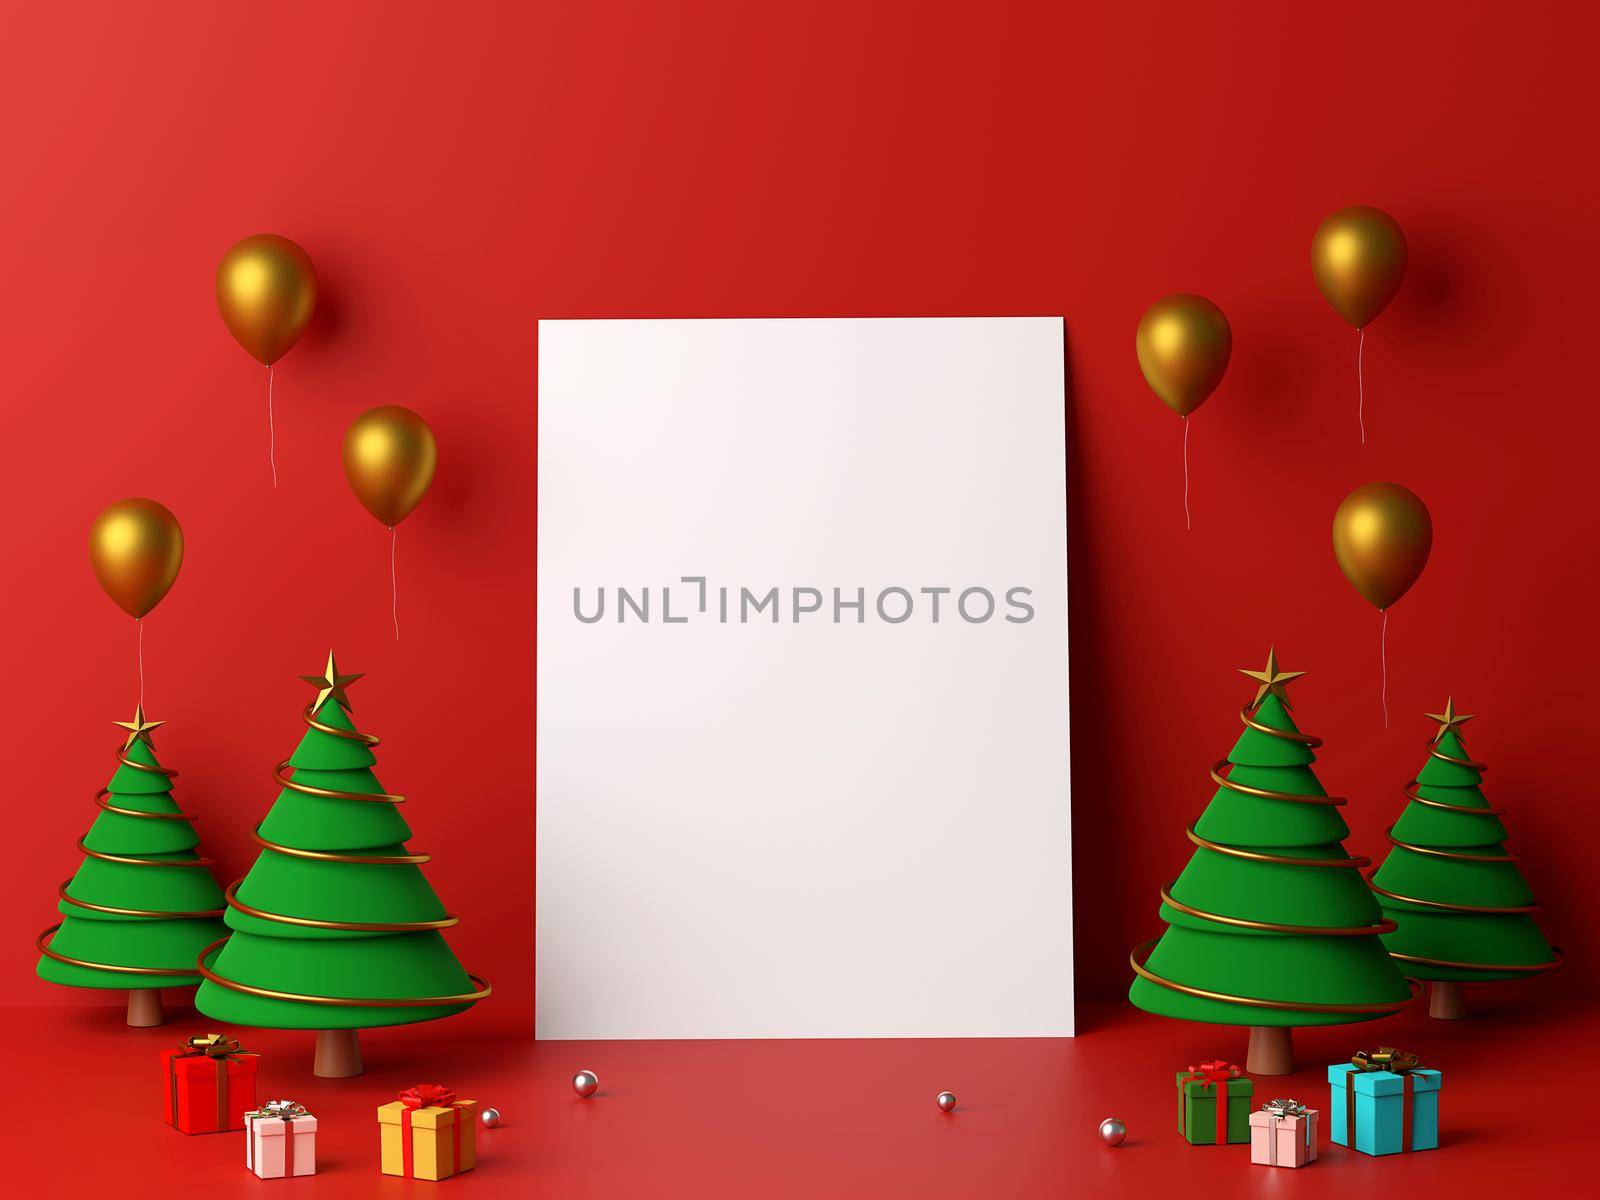 Scene of  blank white paper leaning the wall with Christmas tree, 3d rendering